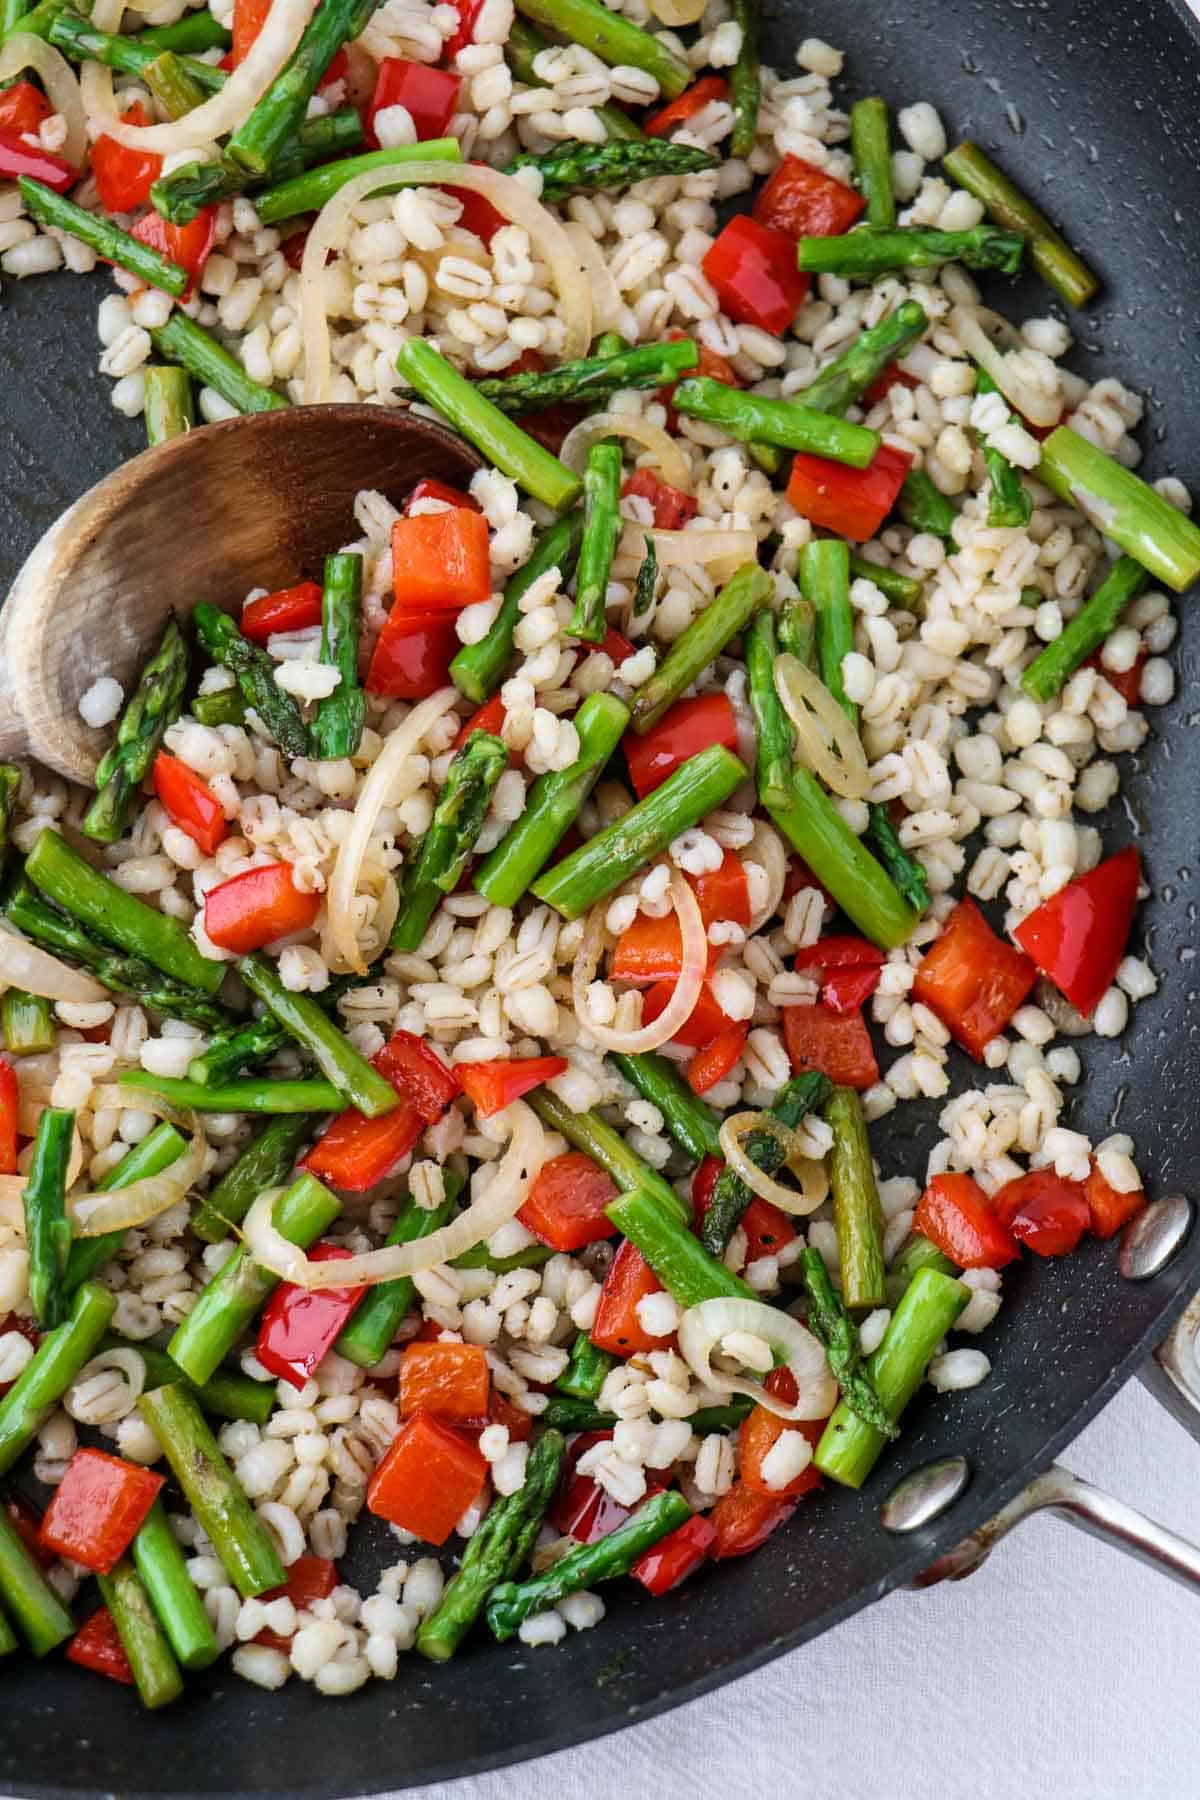 Red pepper, asparagus, shallot and barley in a skillet with a wooden spoon.